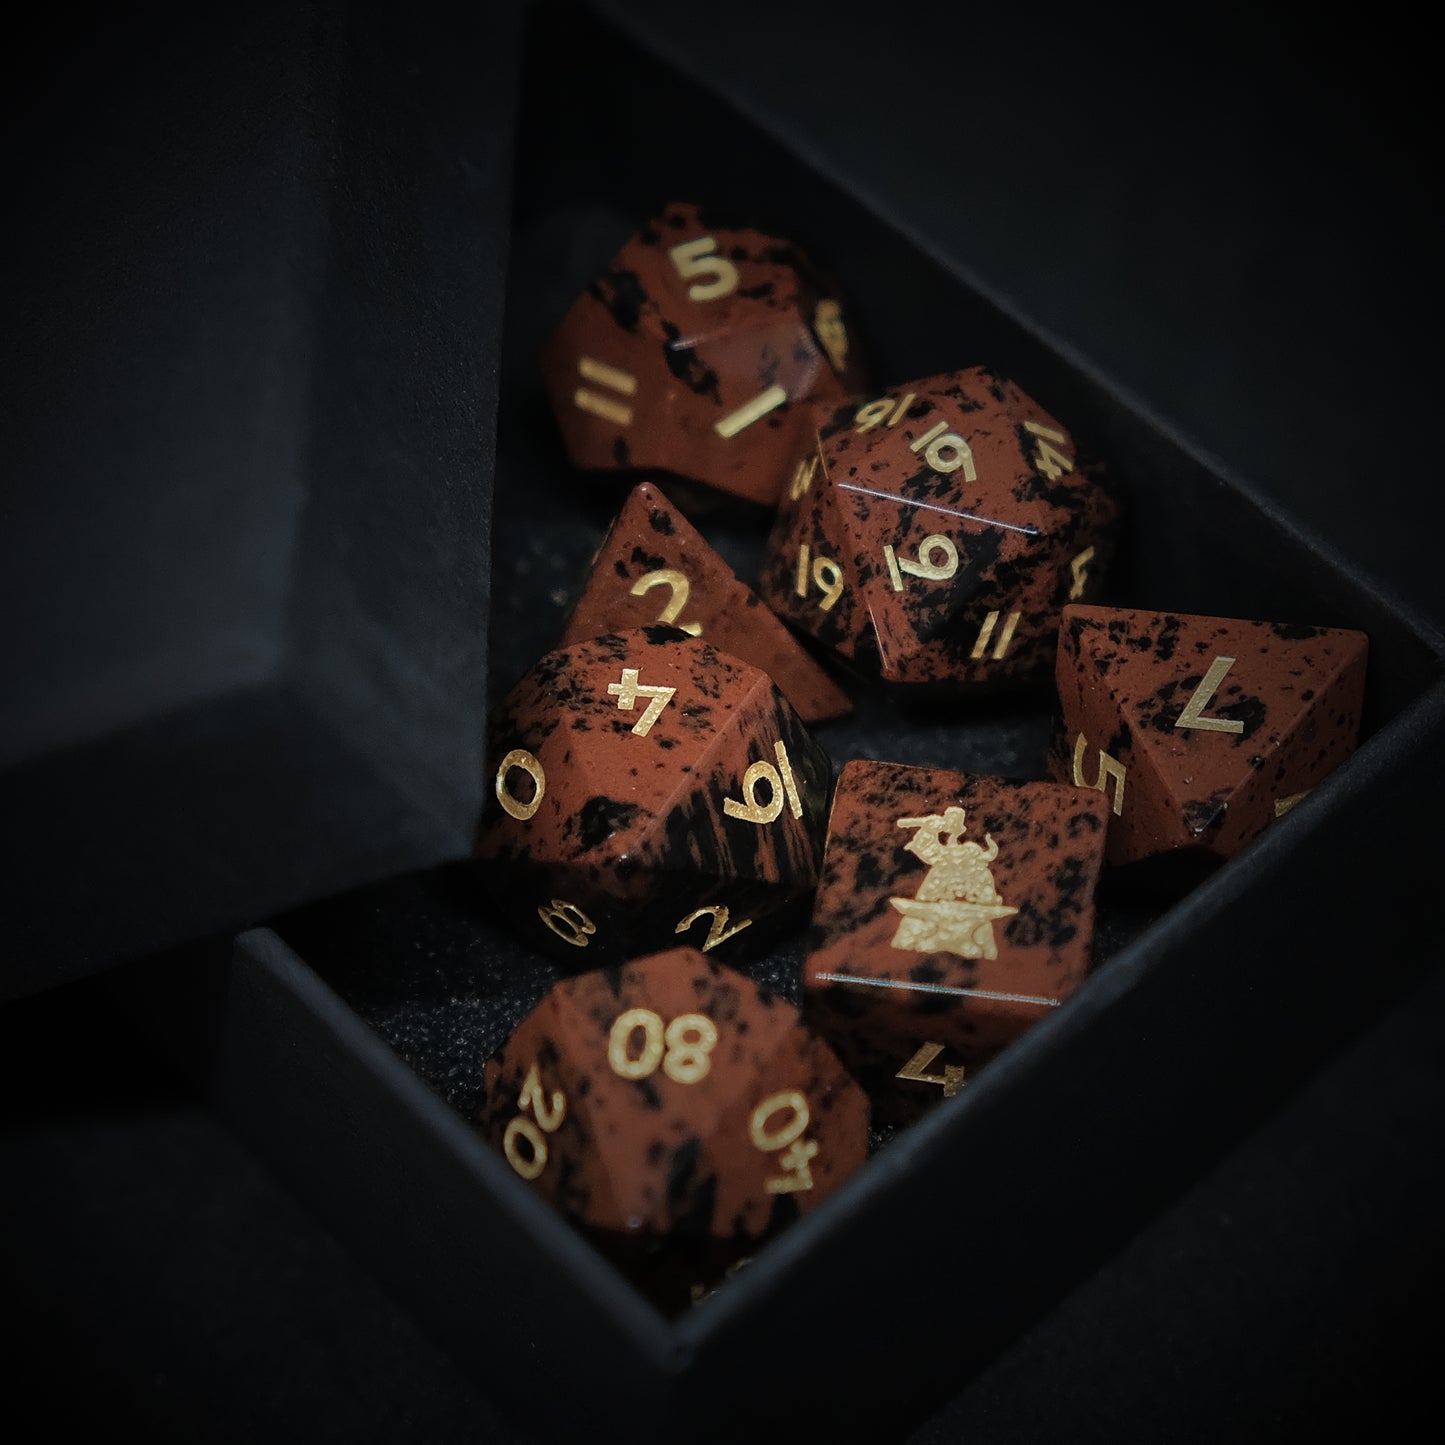 Natural Mahogany Obsidian Golden Swan Gemstone Dice Set of 7 D6 with Logo for RPG Table-top Board Game. Gift for Game Lover